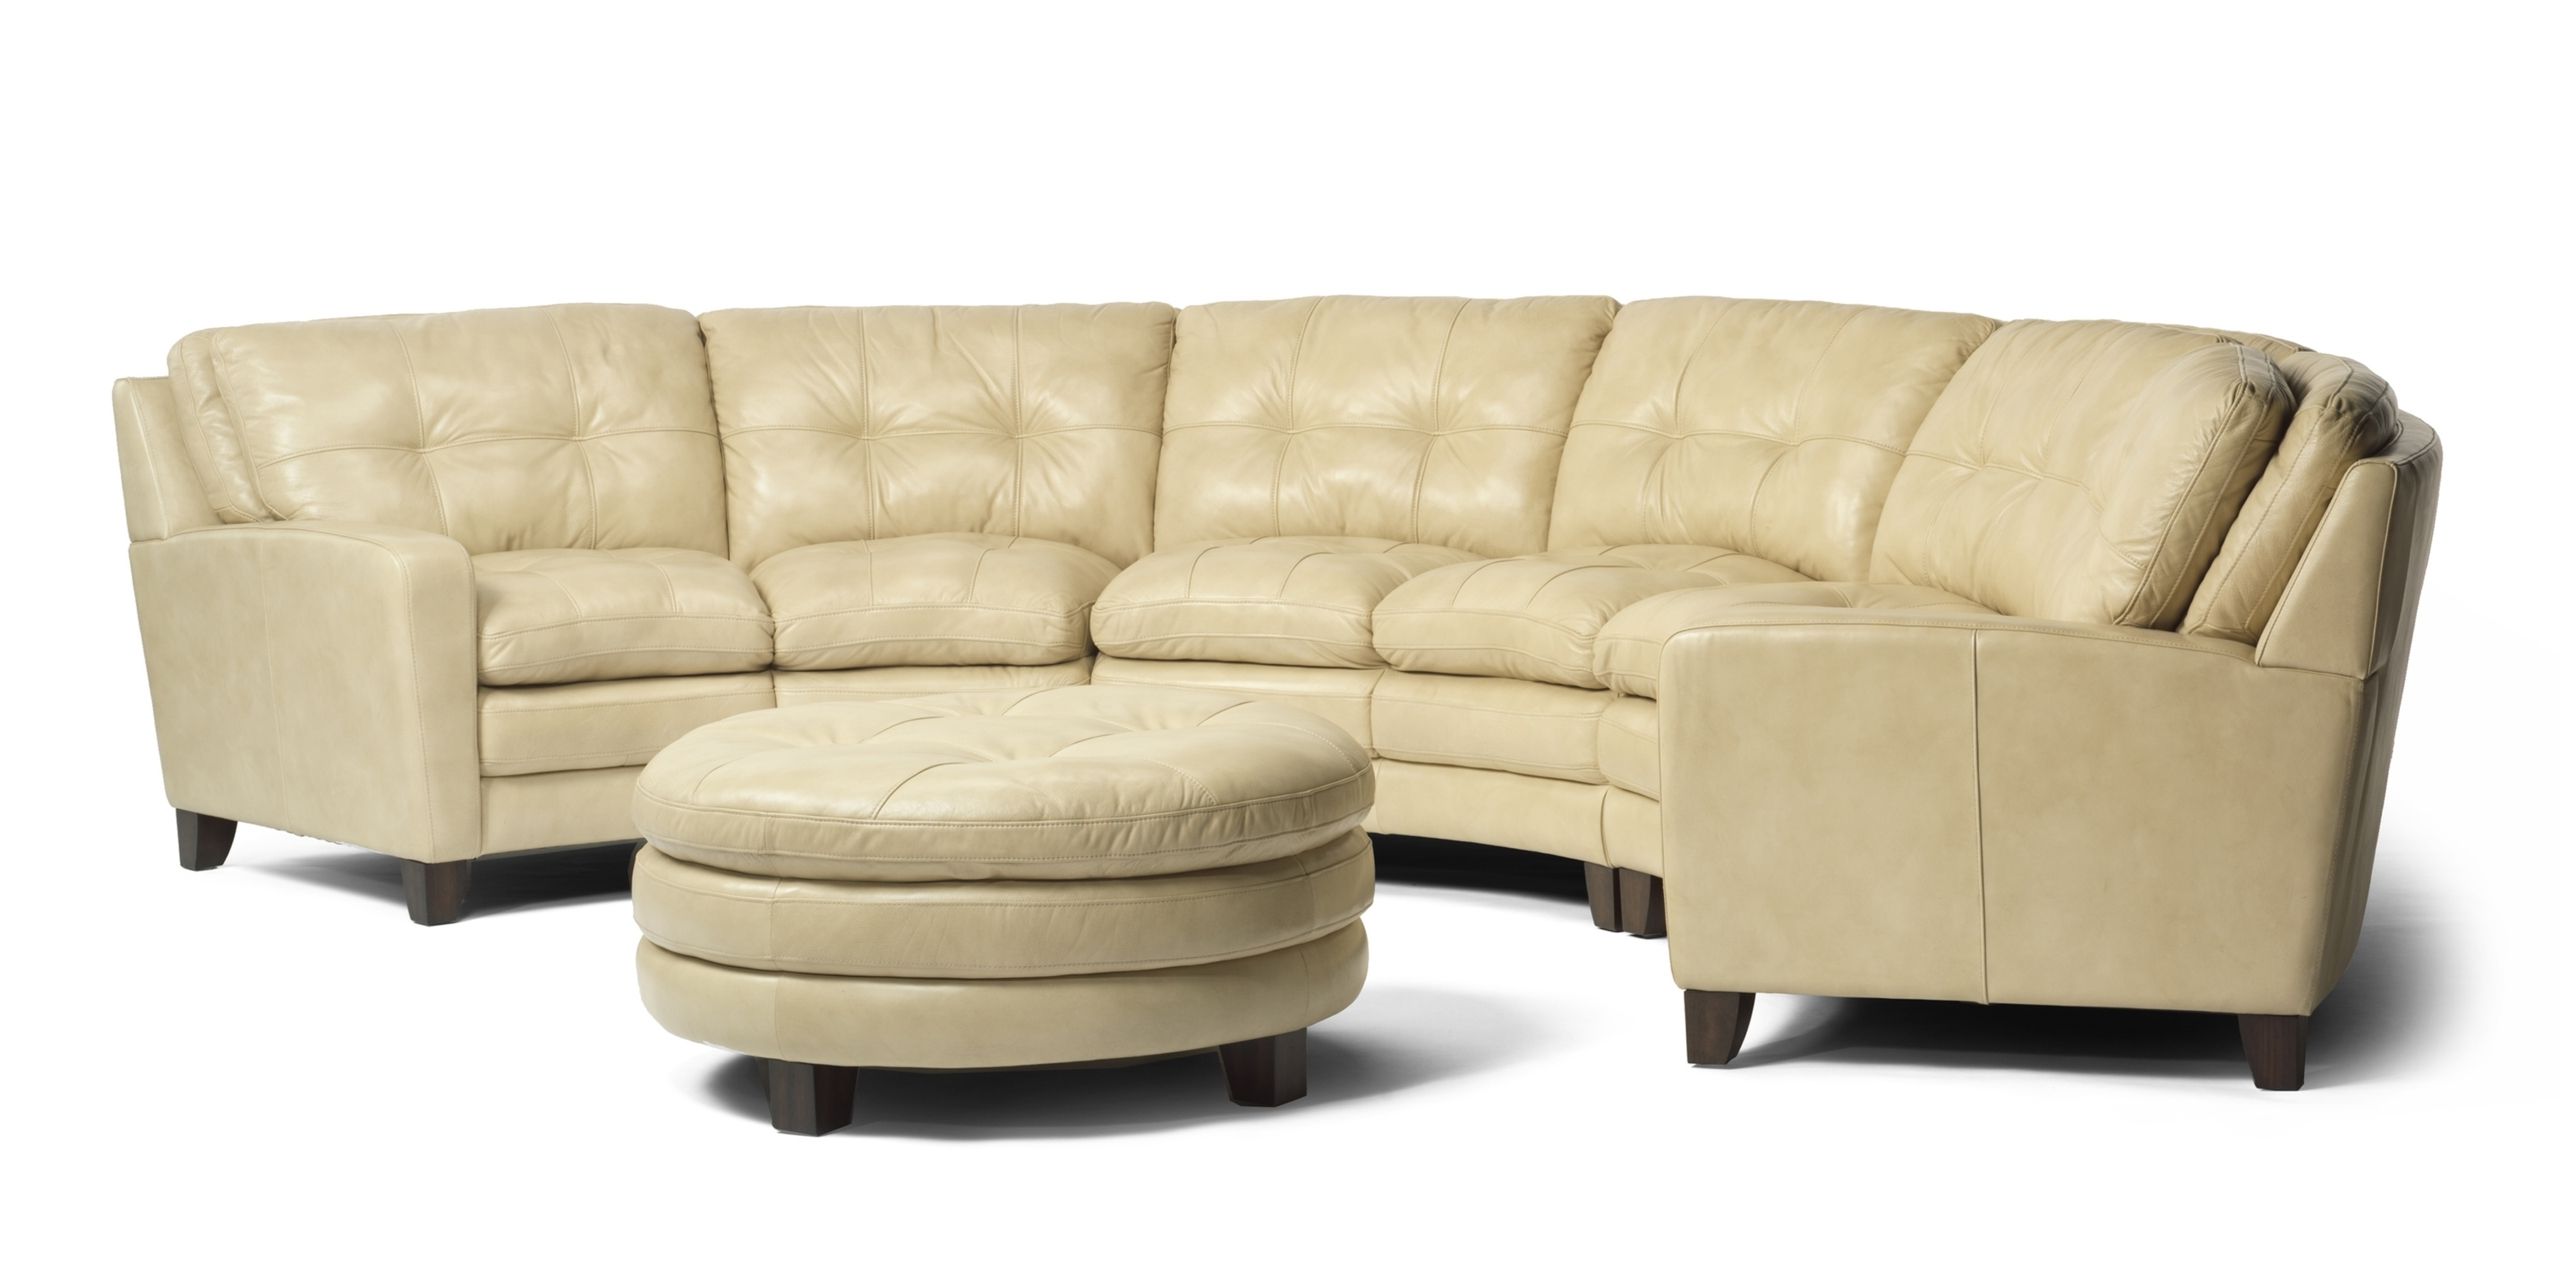 Most Recent 130" Curved Sectionals Regarding Curved Sectional Couches – Ideas On Foter (View 7 of 15)